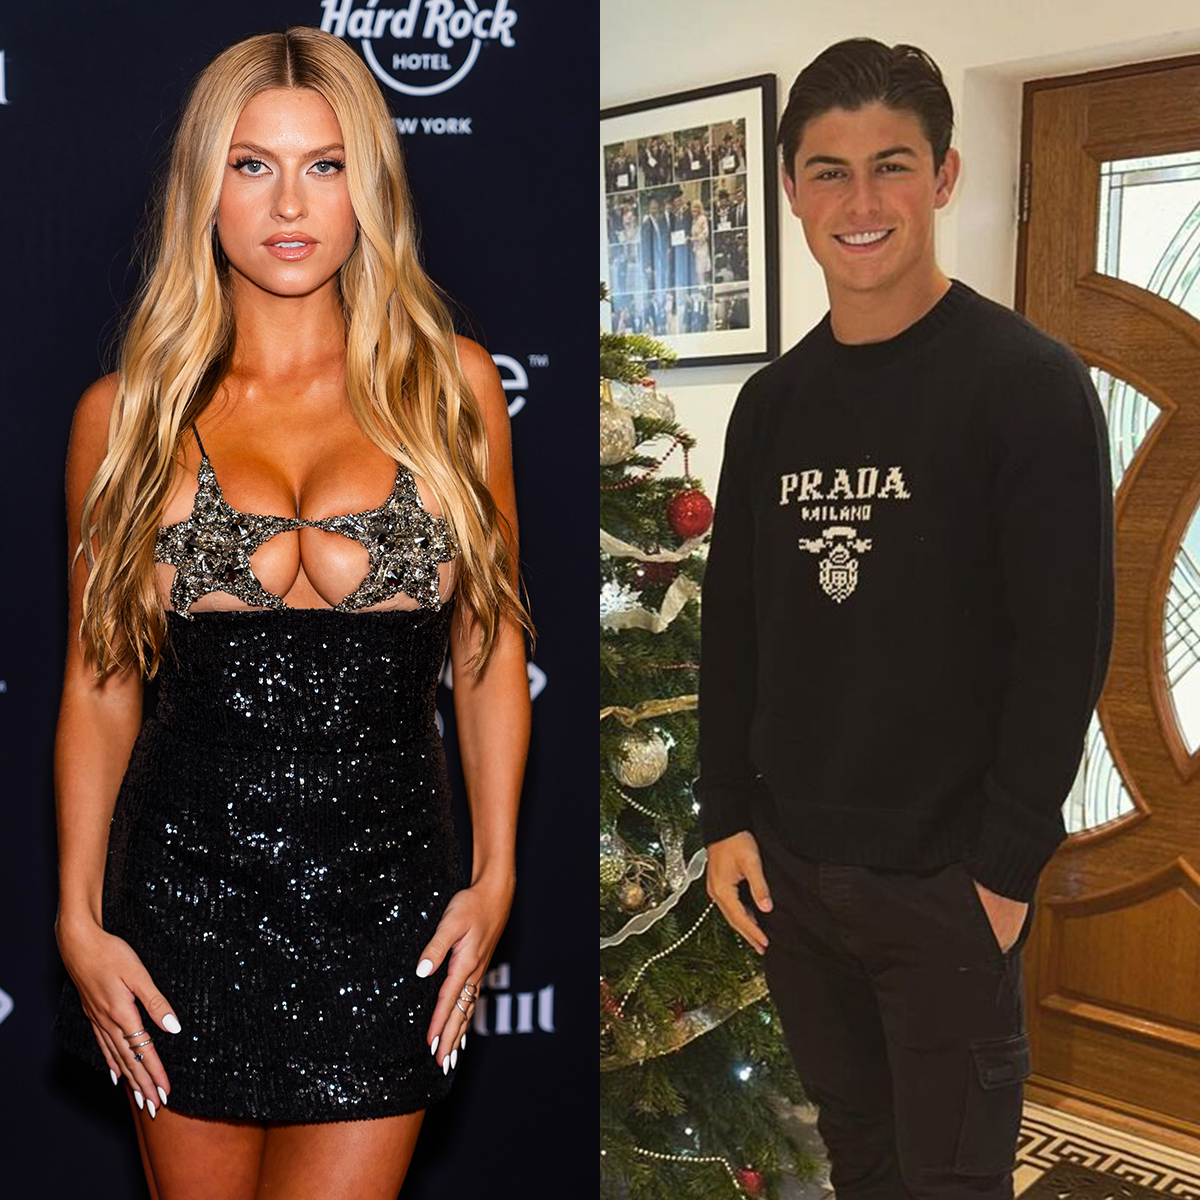 Is Xandra Pohl Dating Kansas City Chiefs’ Louis Rees-Zamm? She Says…